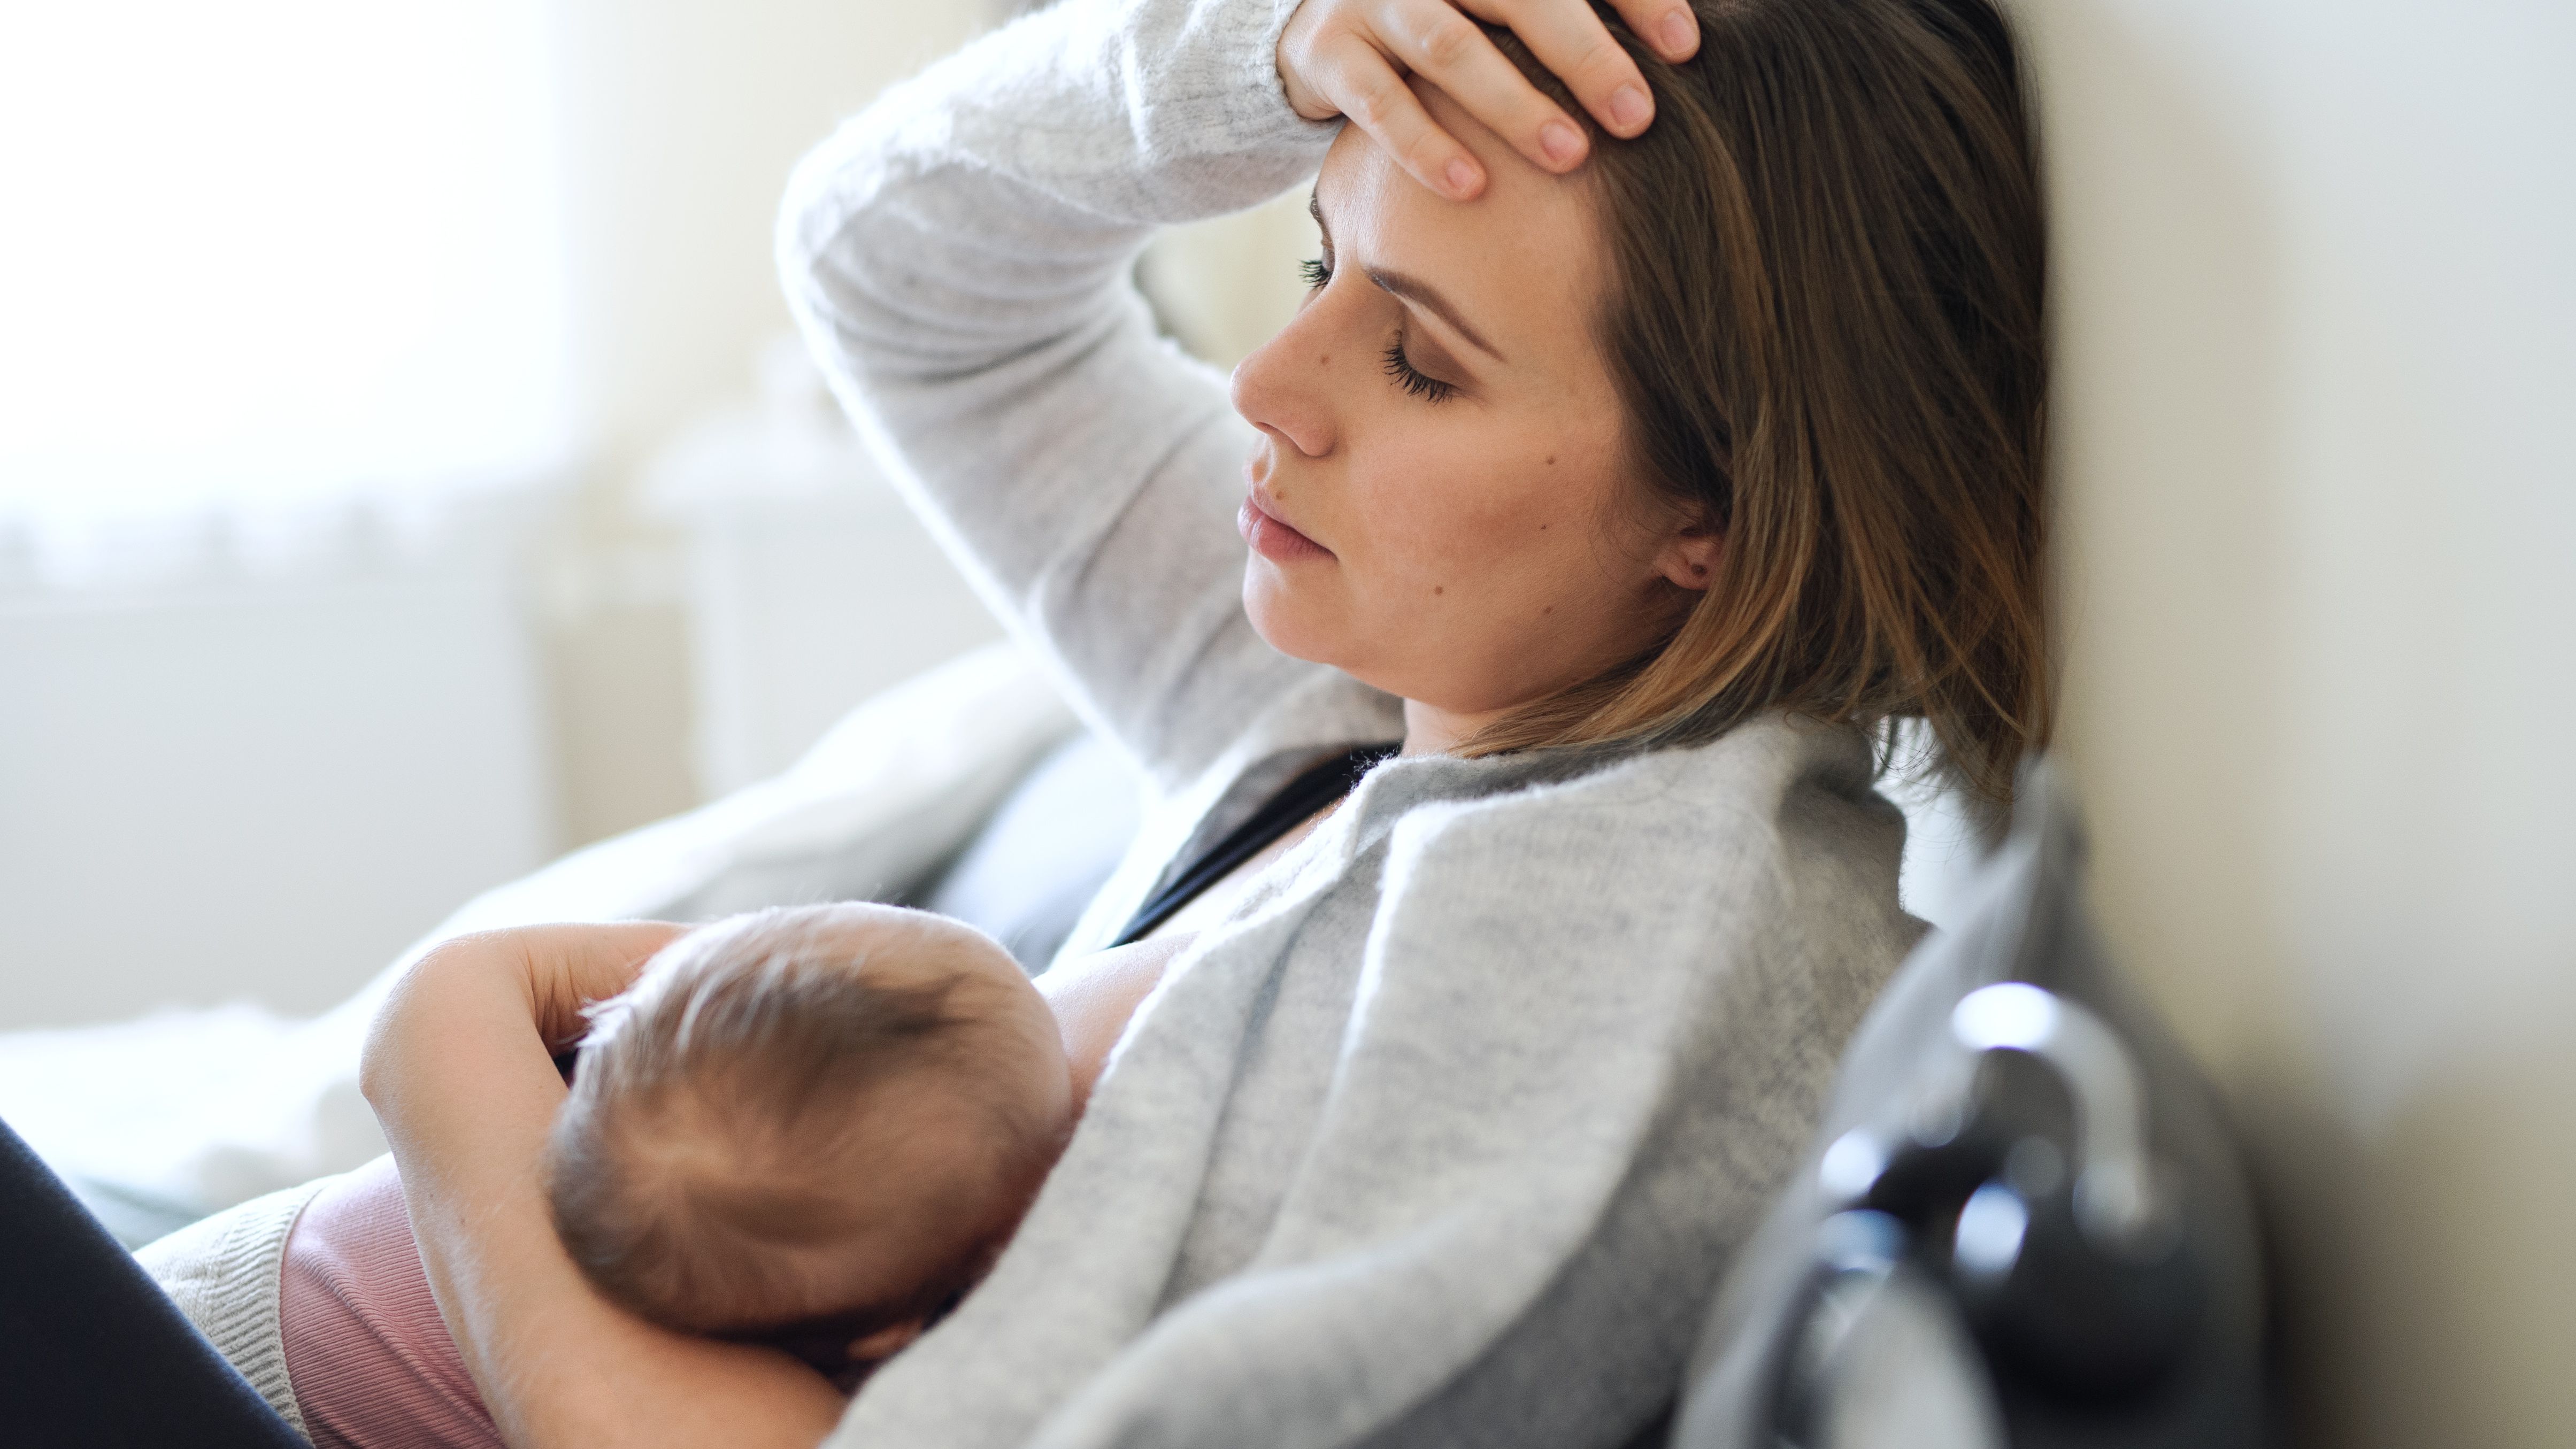 Breast soreness after breastfeeding and what you can do about it.